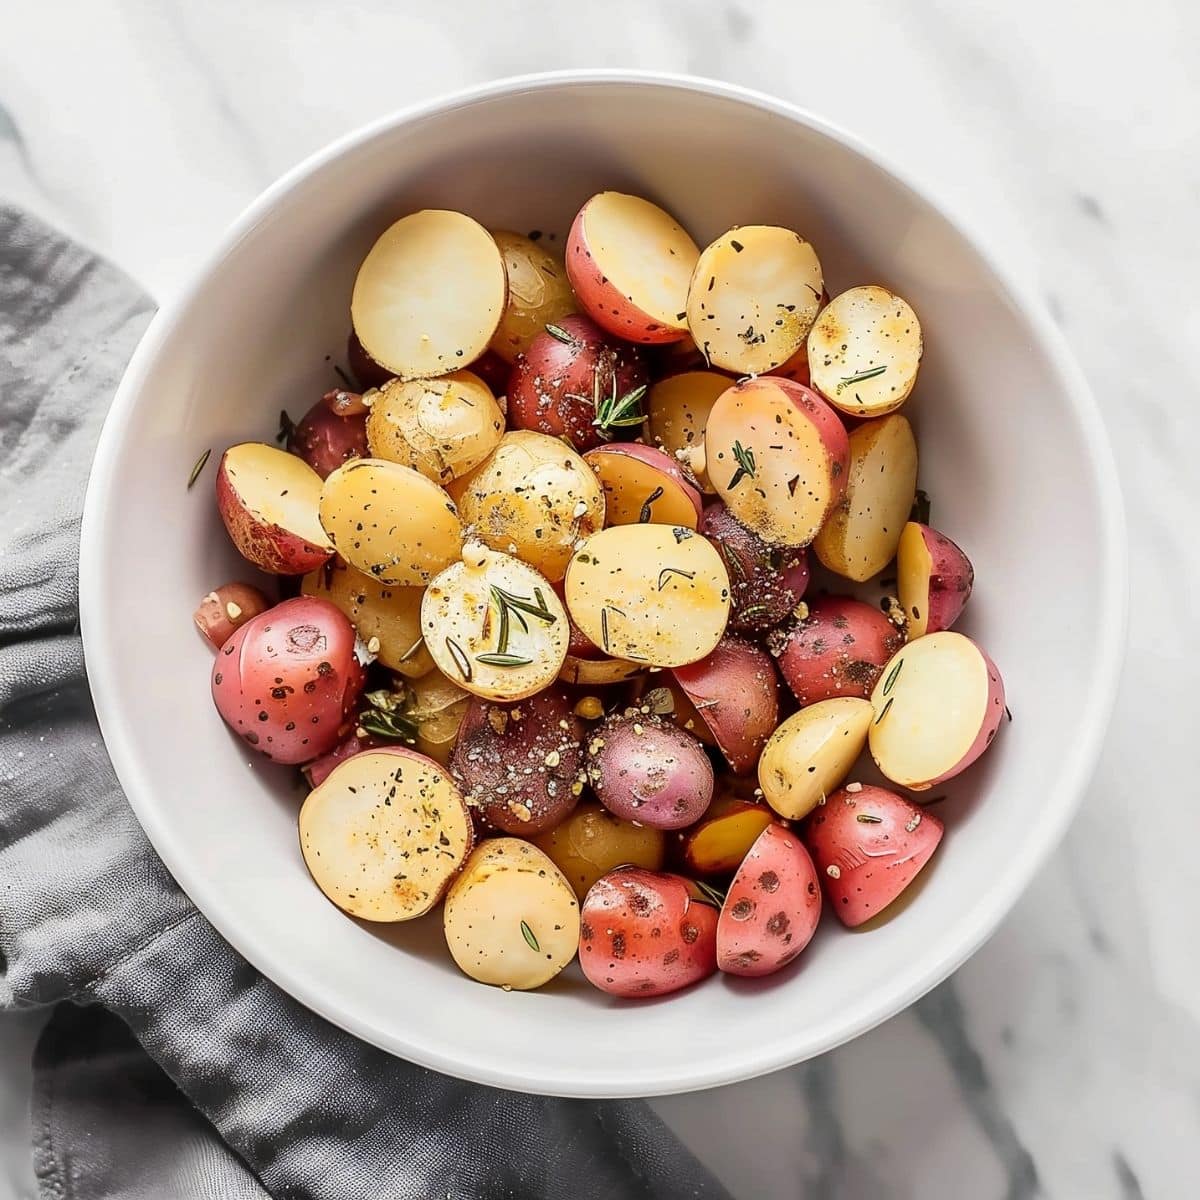 Seasoned Raw Potatoes in a White Bowl on a White Marble Table